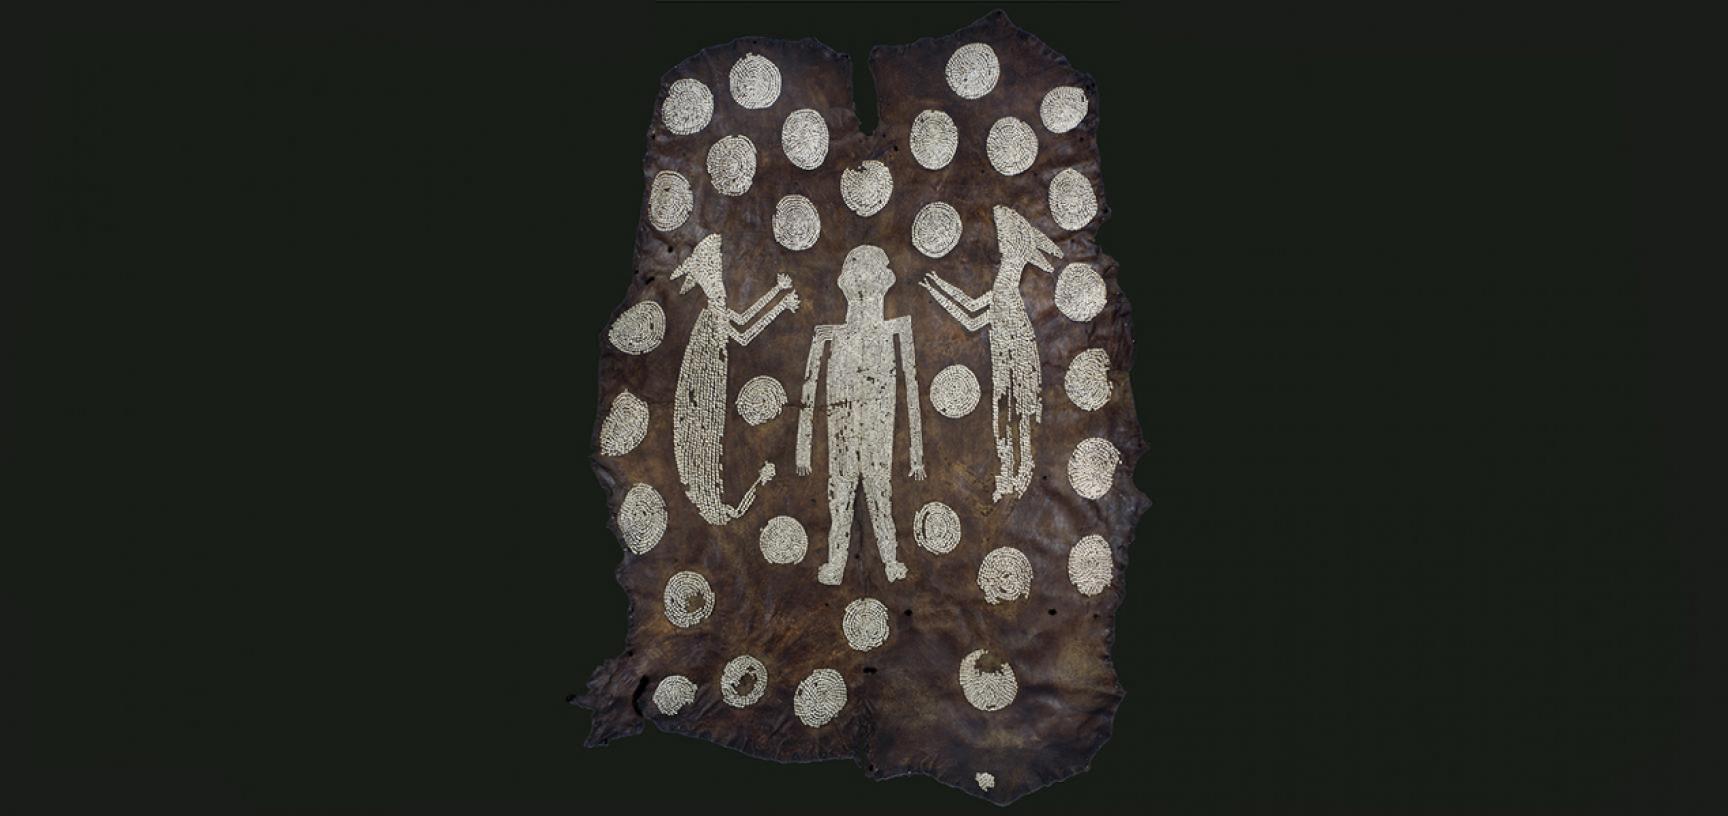 POWHATAN'S MANTLE from the Ashmolean collections